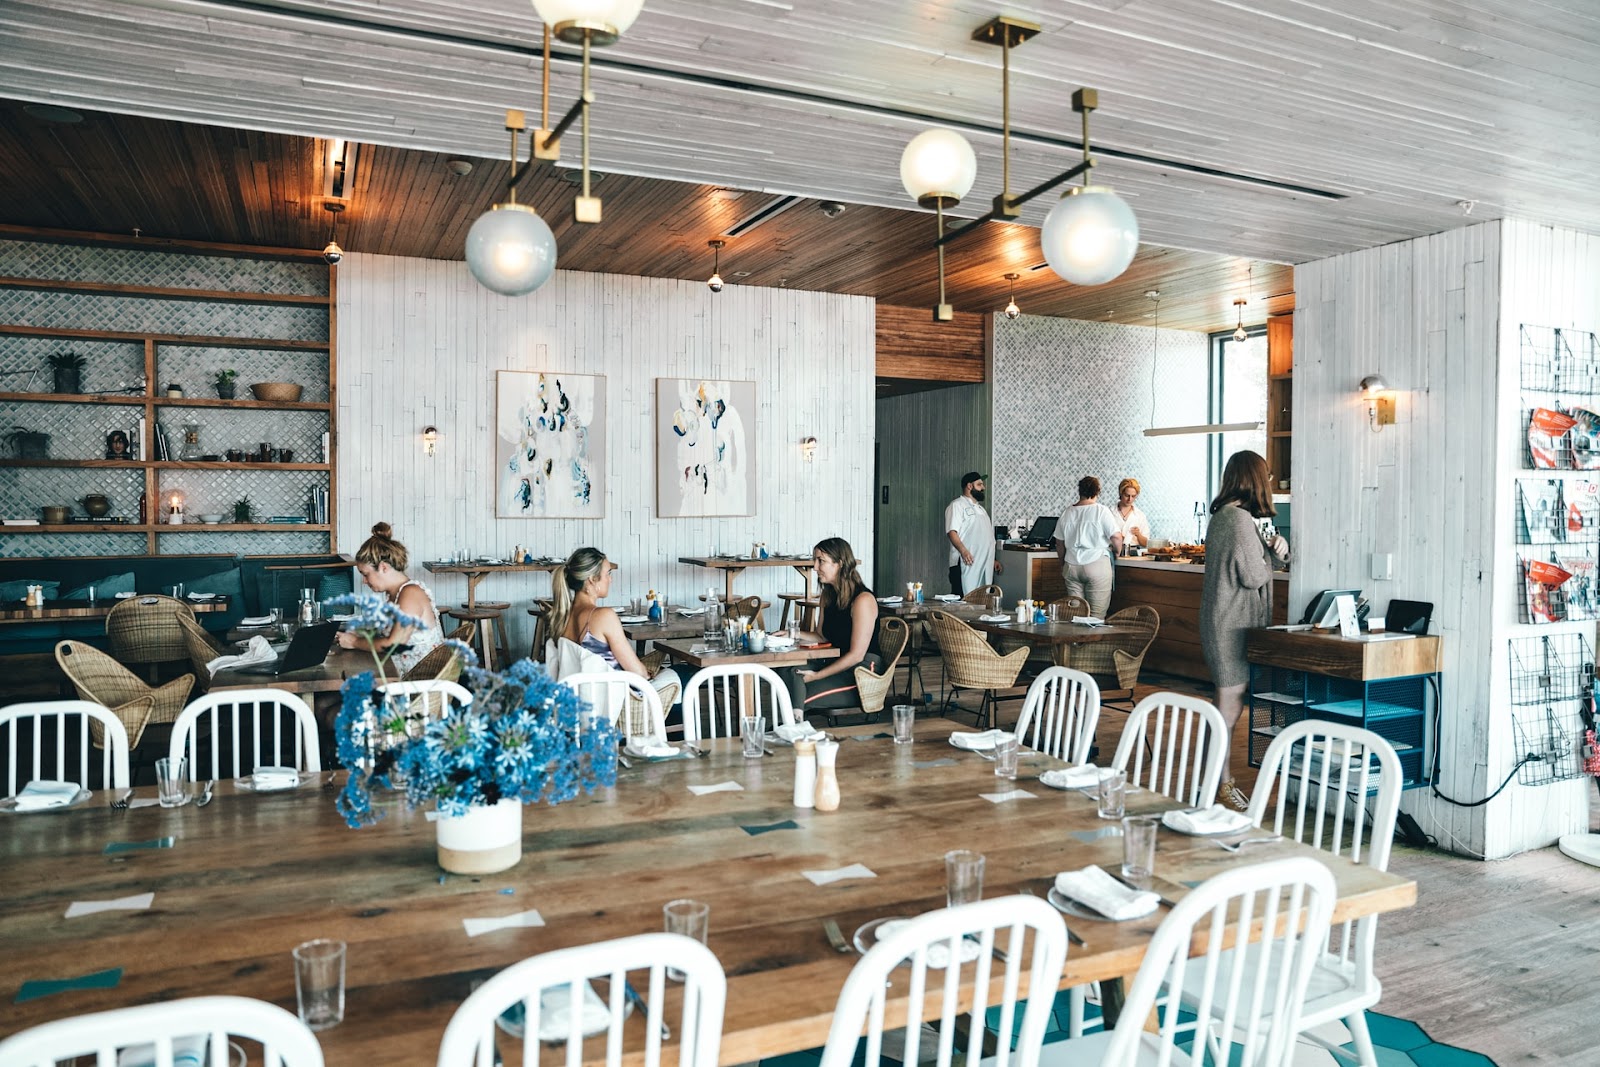 Style Guide - 5 Tips for Furnishing Your Coffee Shop